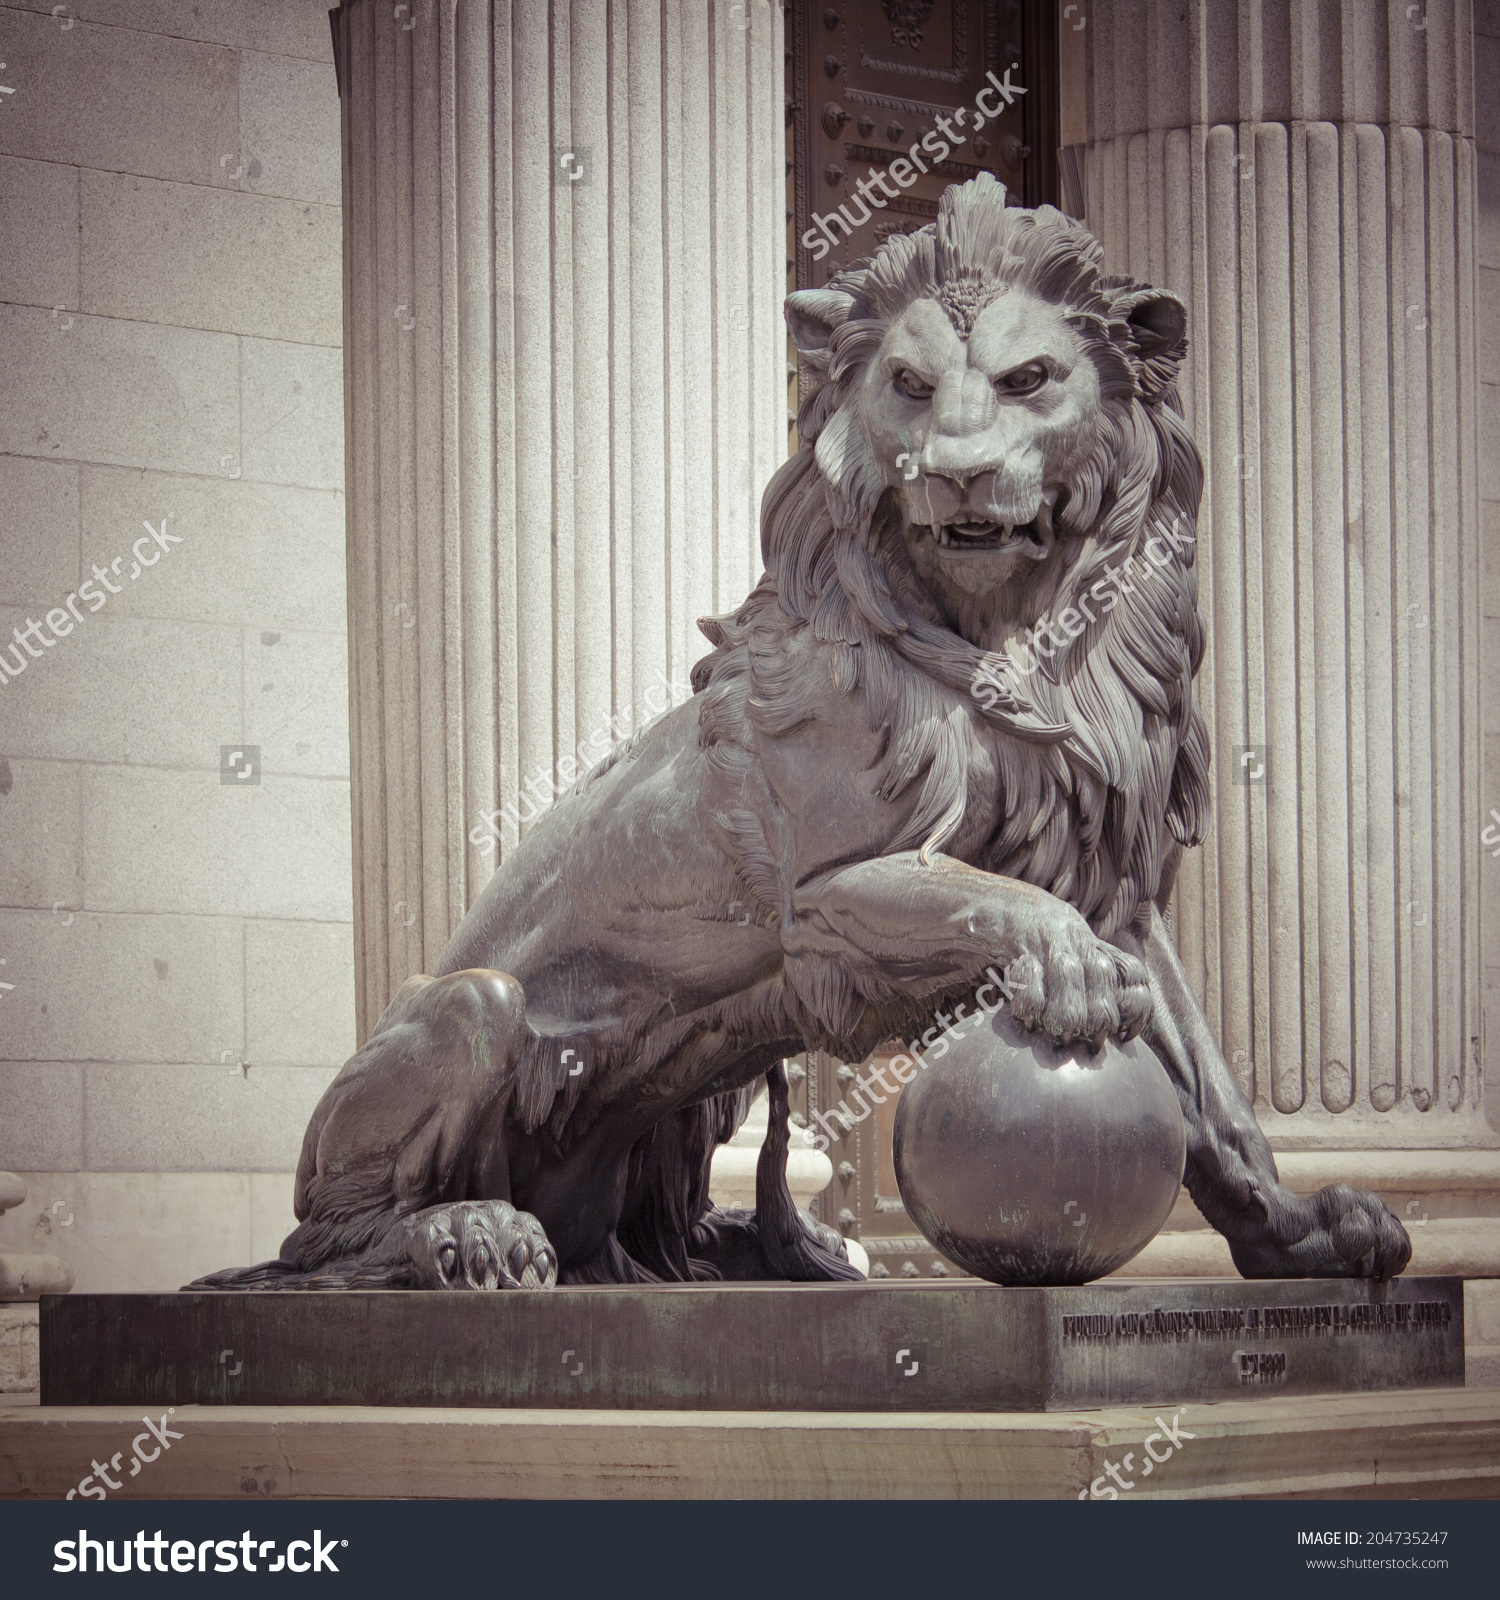 lion statue - Buscar con Google | Sculpture Reference and such ...